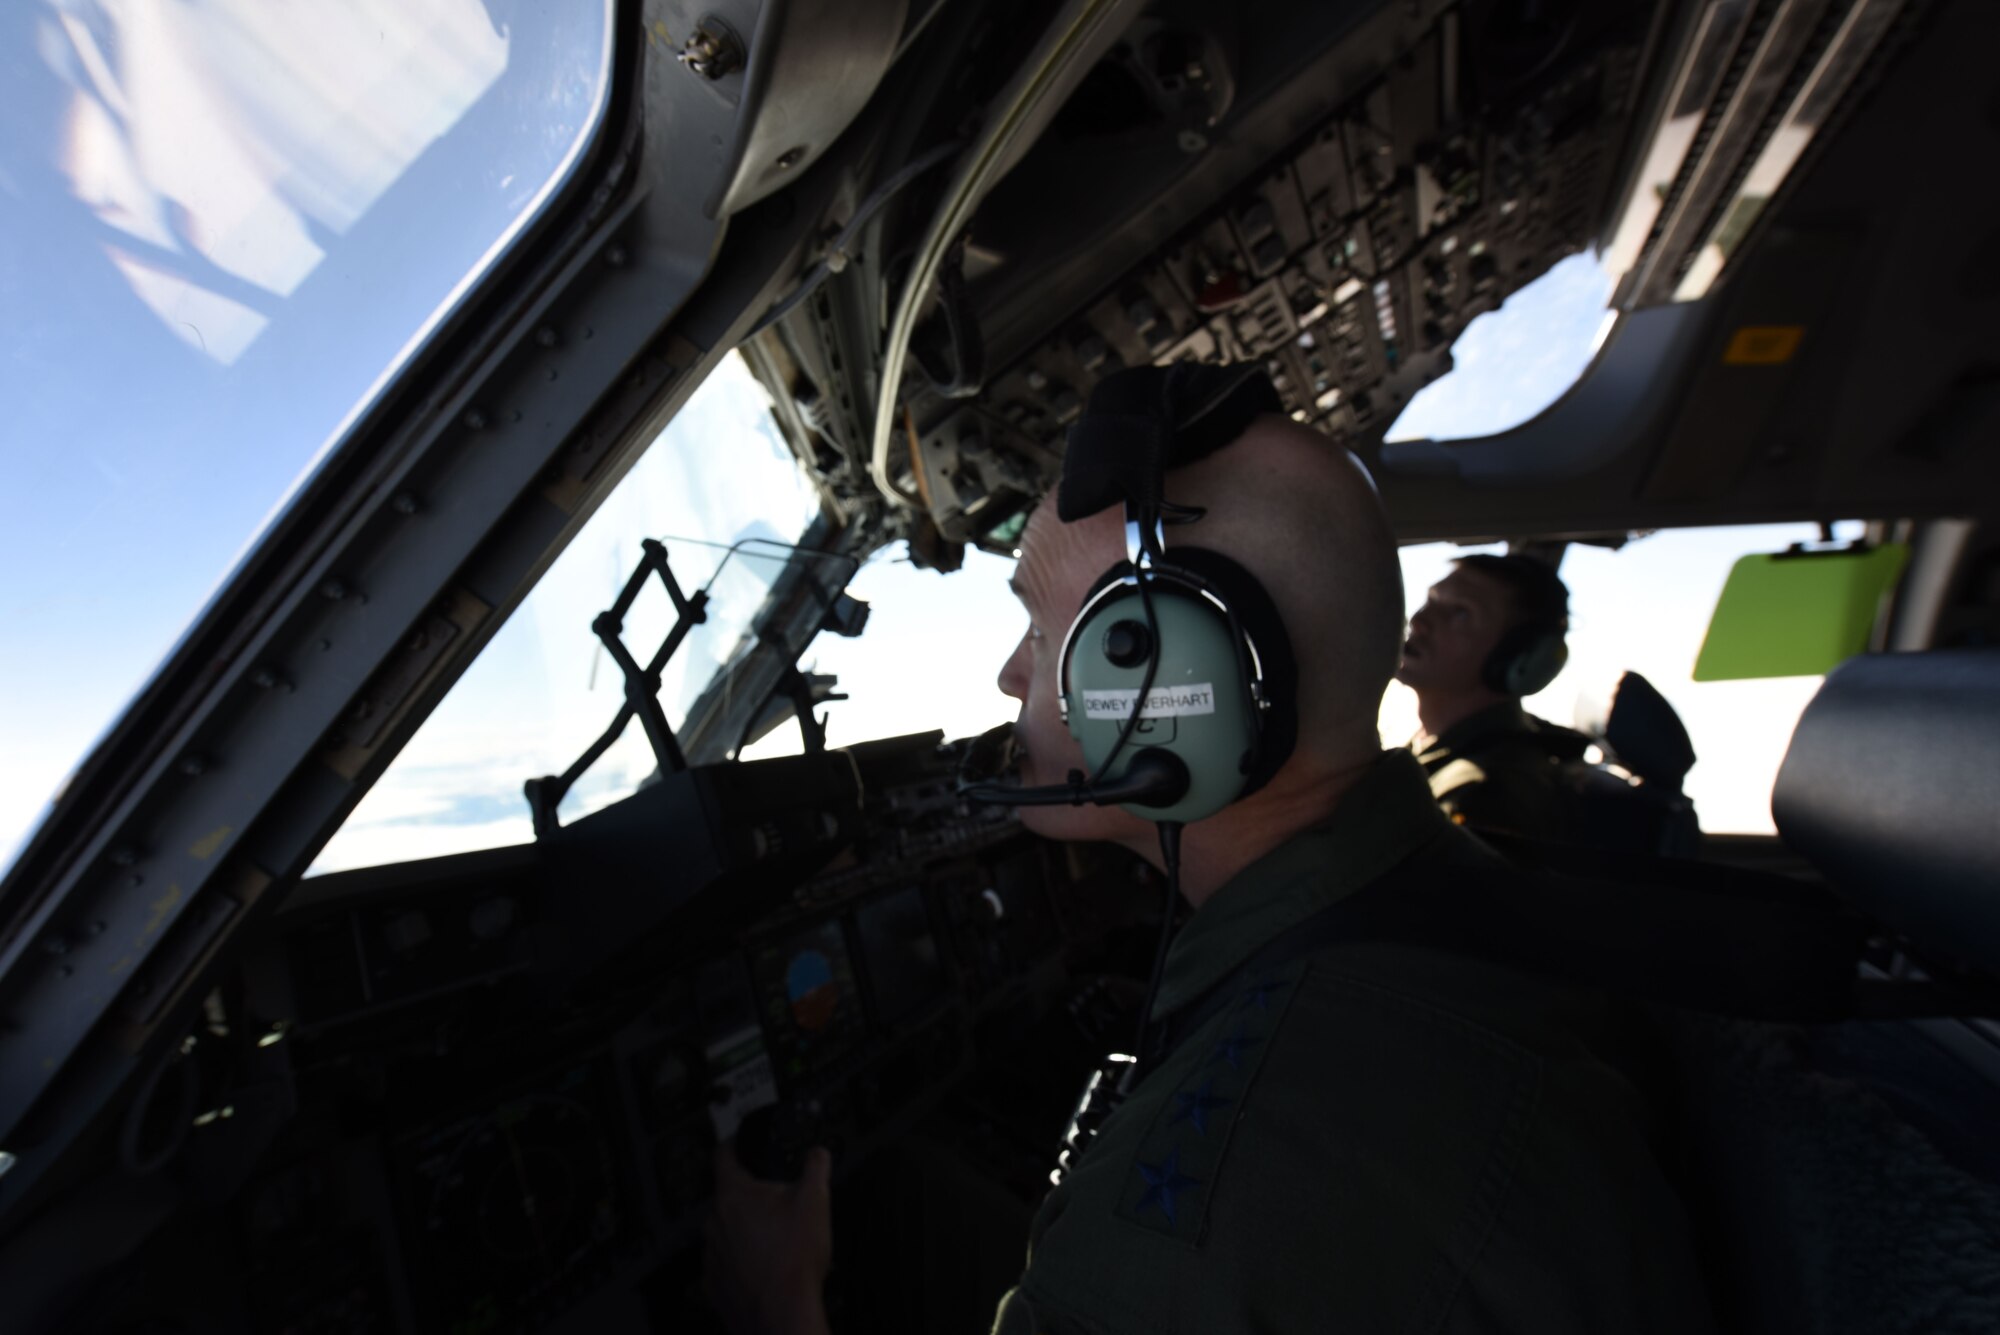 Gen. Carlton D. Everhart II, Air Mobility Command commander, pilots a C-17 Globemaster III near Joint Base Lewis-McChord, Wash., Jan. 25, 2018. Everhart flew the aircraft during his visit to JBLM to see what Team McChord is made of during an exercise. (U.S. Air Force photo by Senior Airman Tryphena Mayhugh)